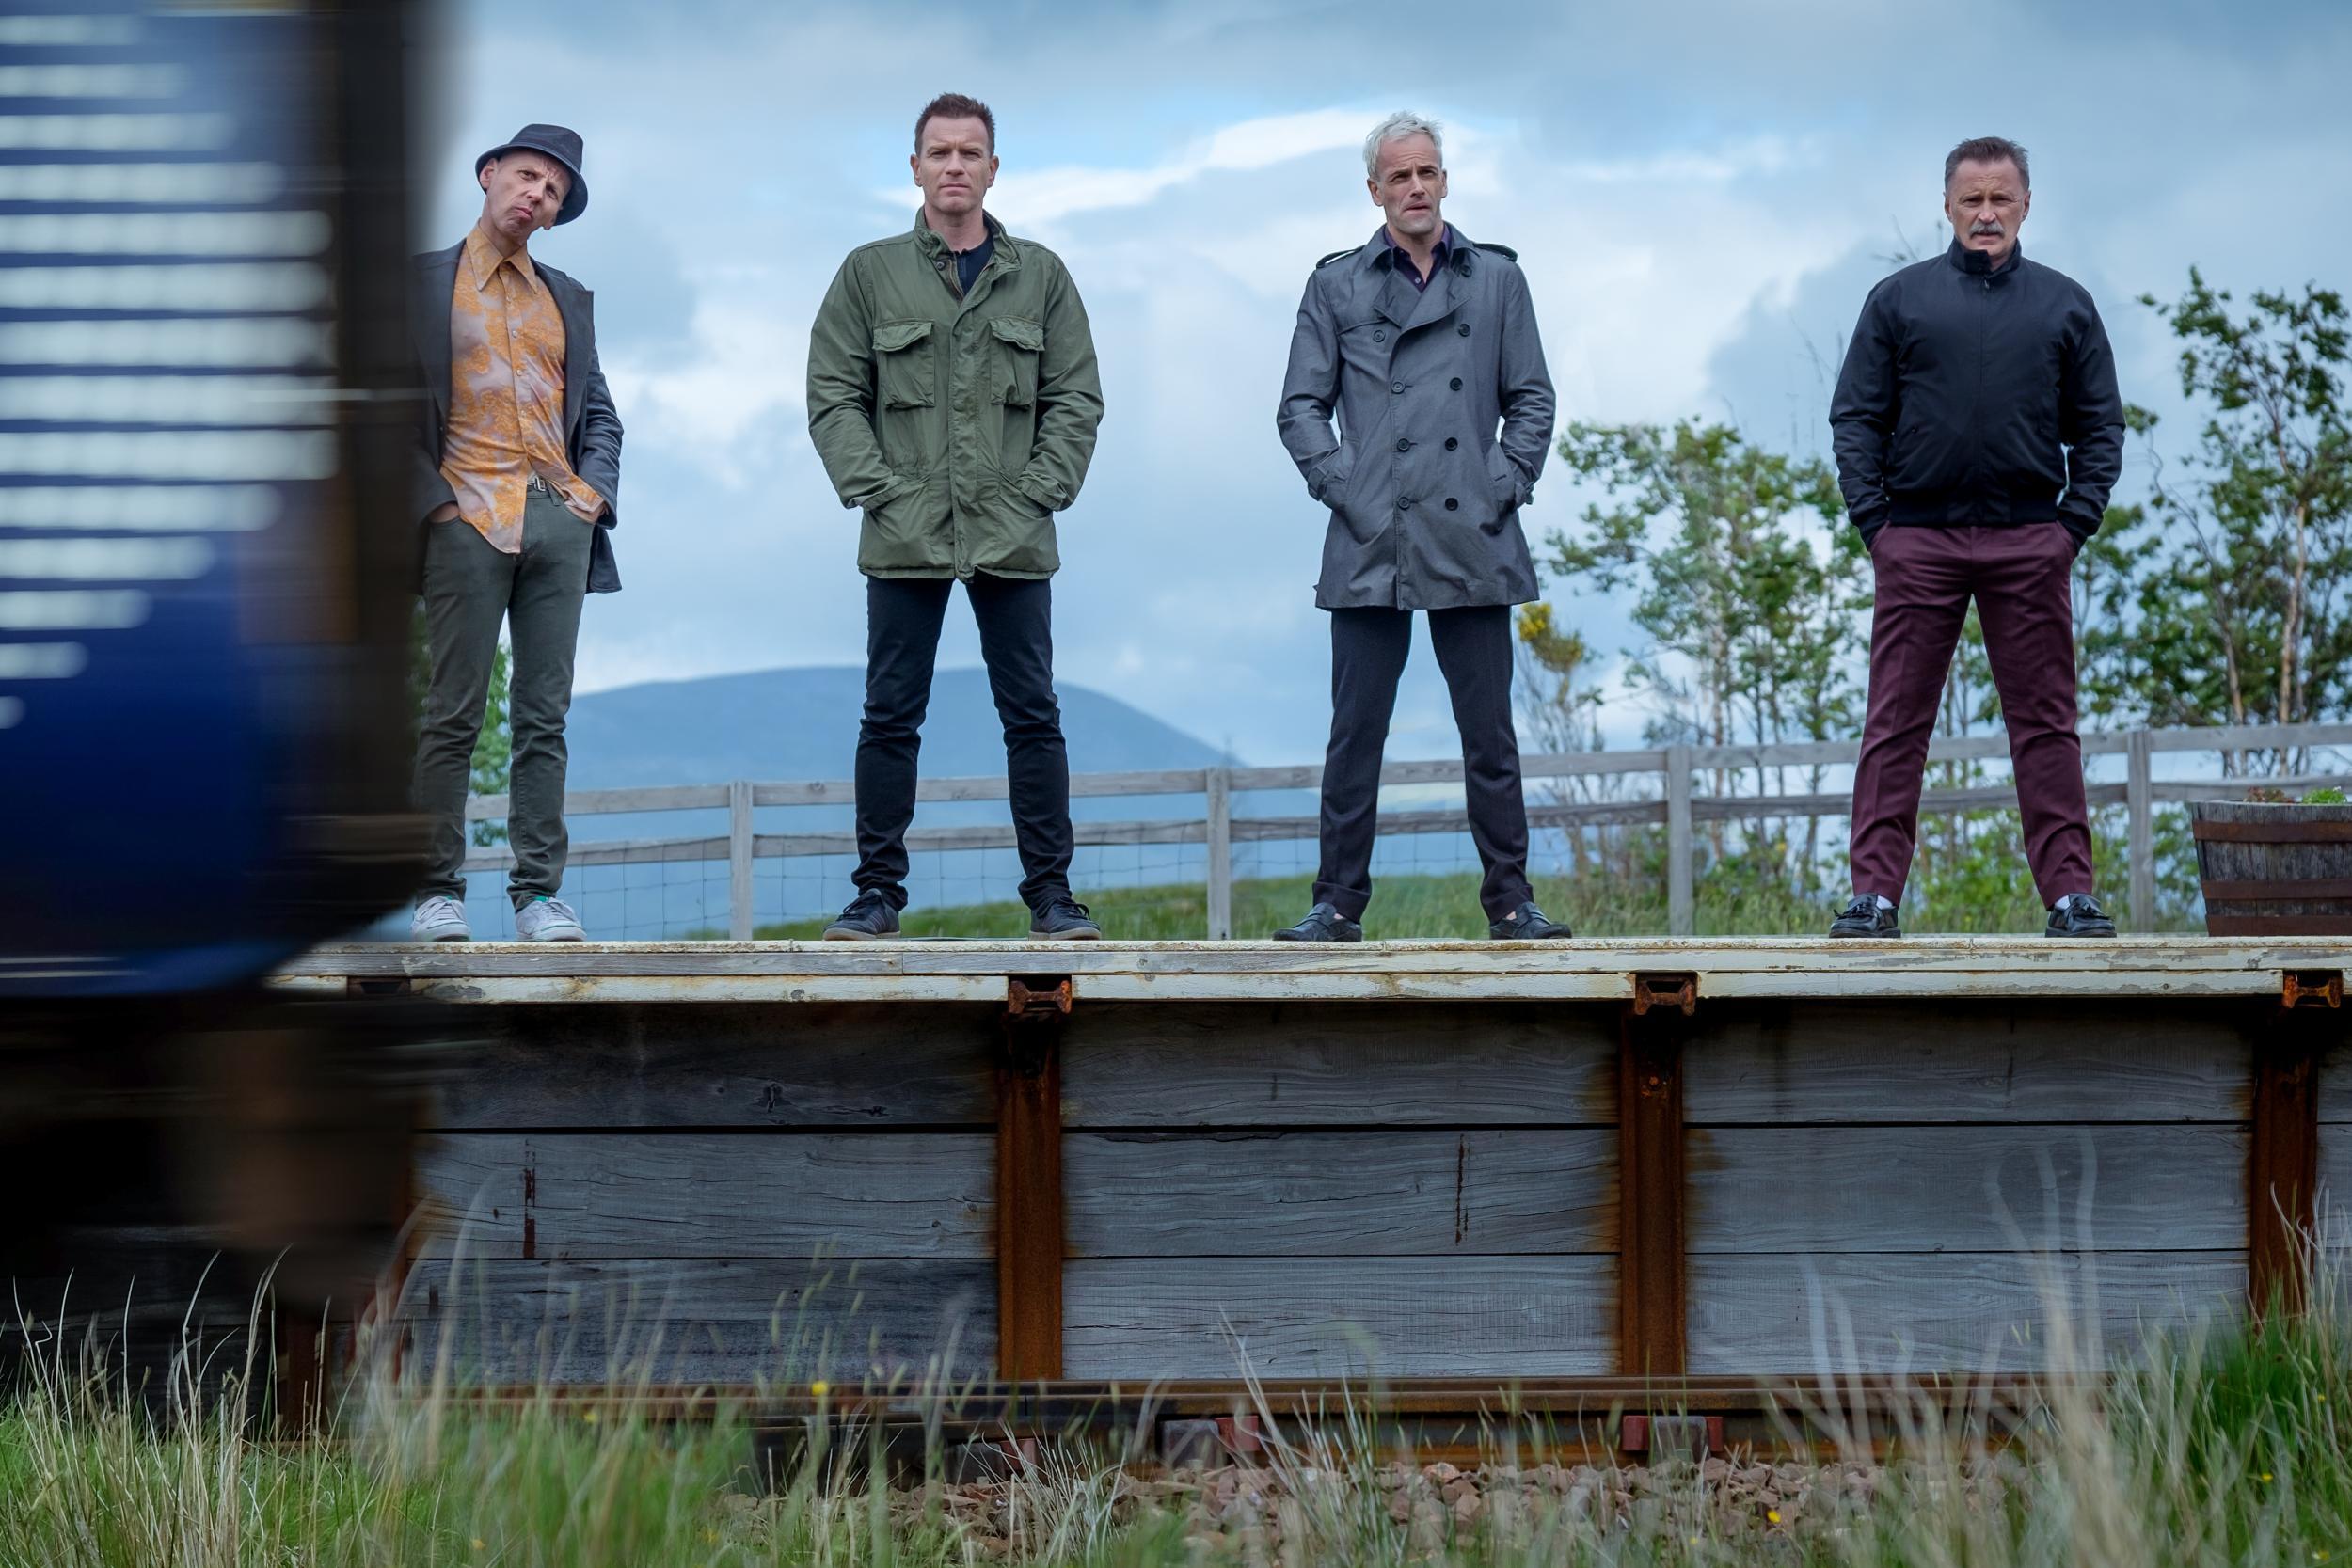 Spud, Renton, Sick Boy and Begbie return in the long-awaited ‘Trainspotting’ sequel